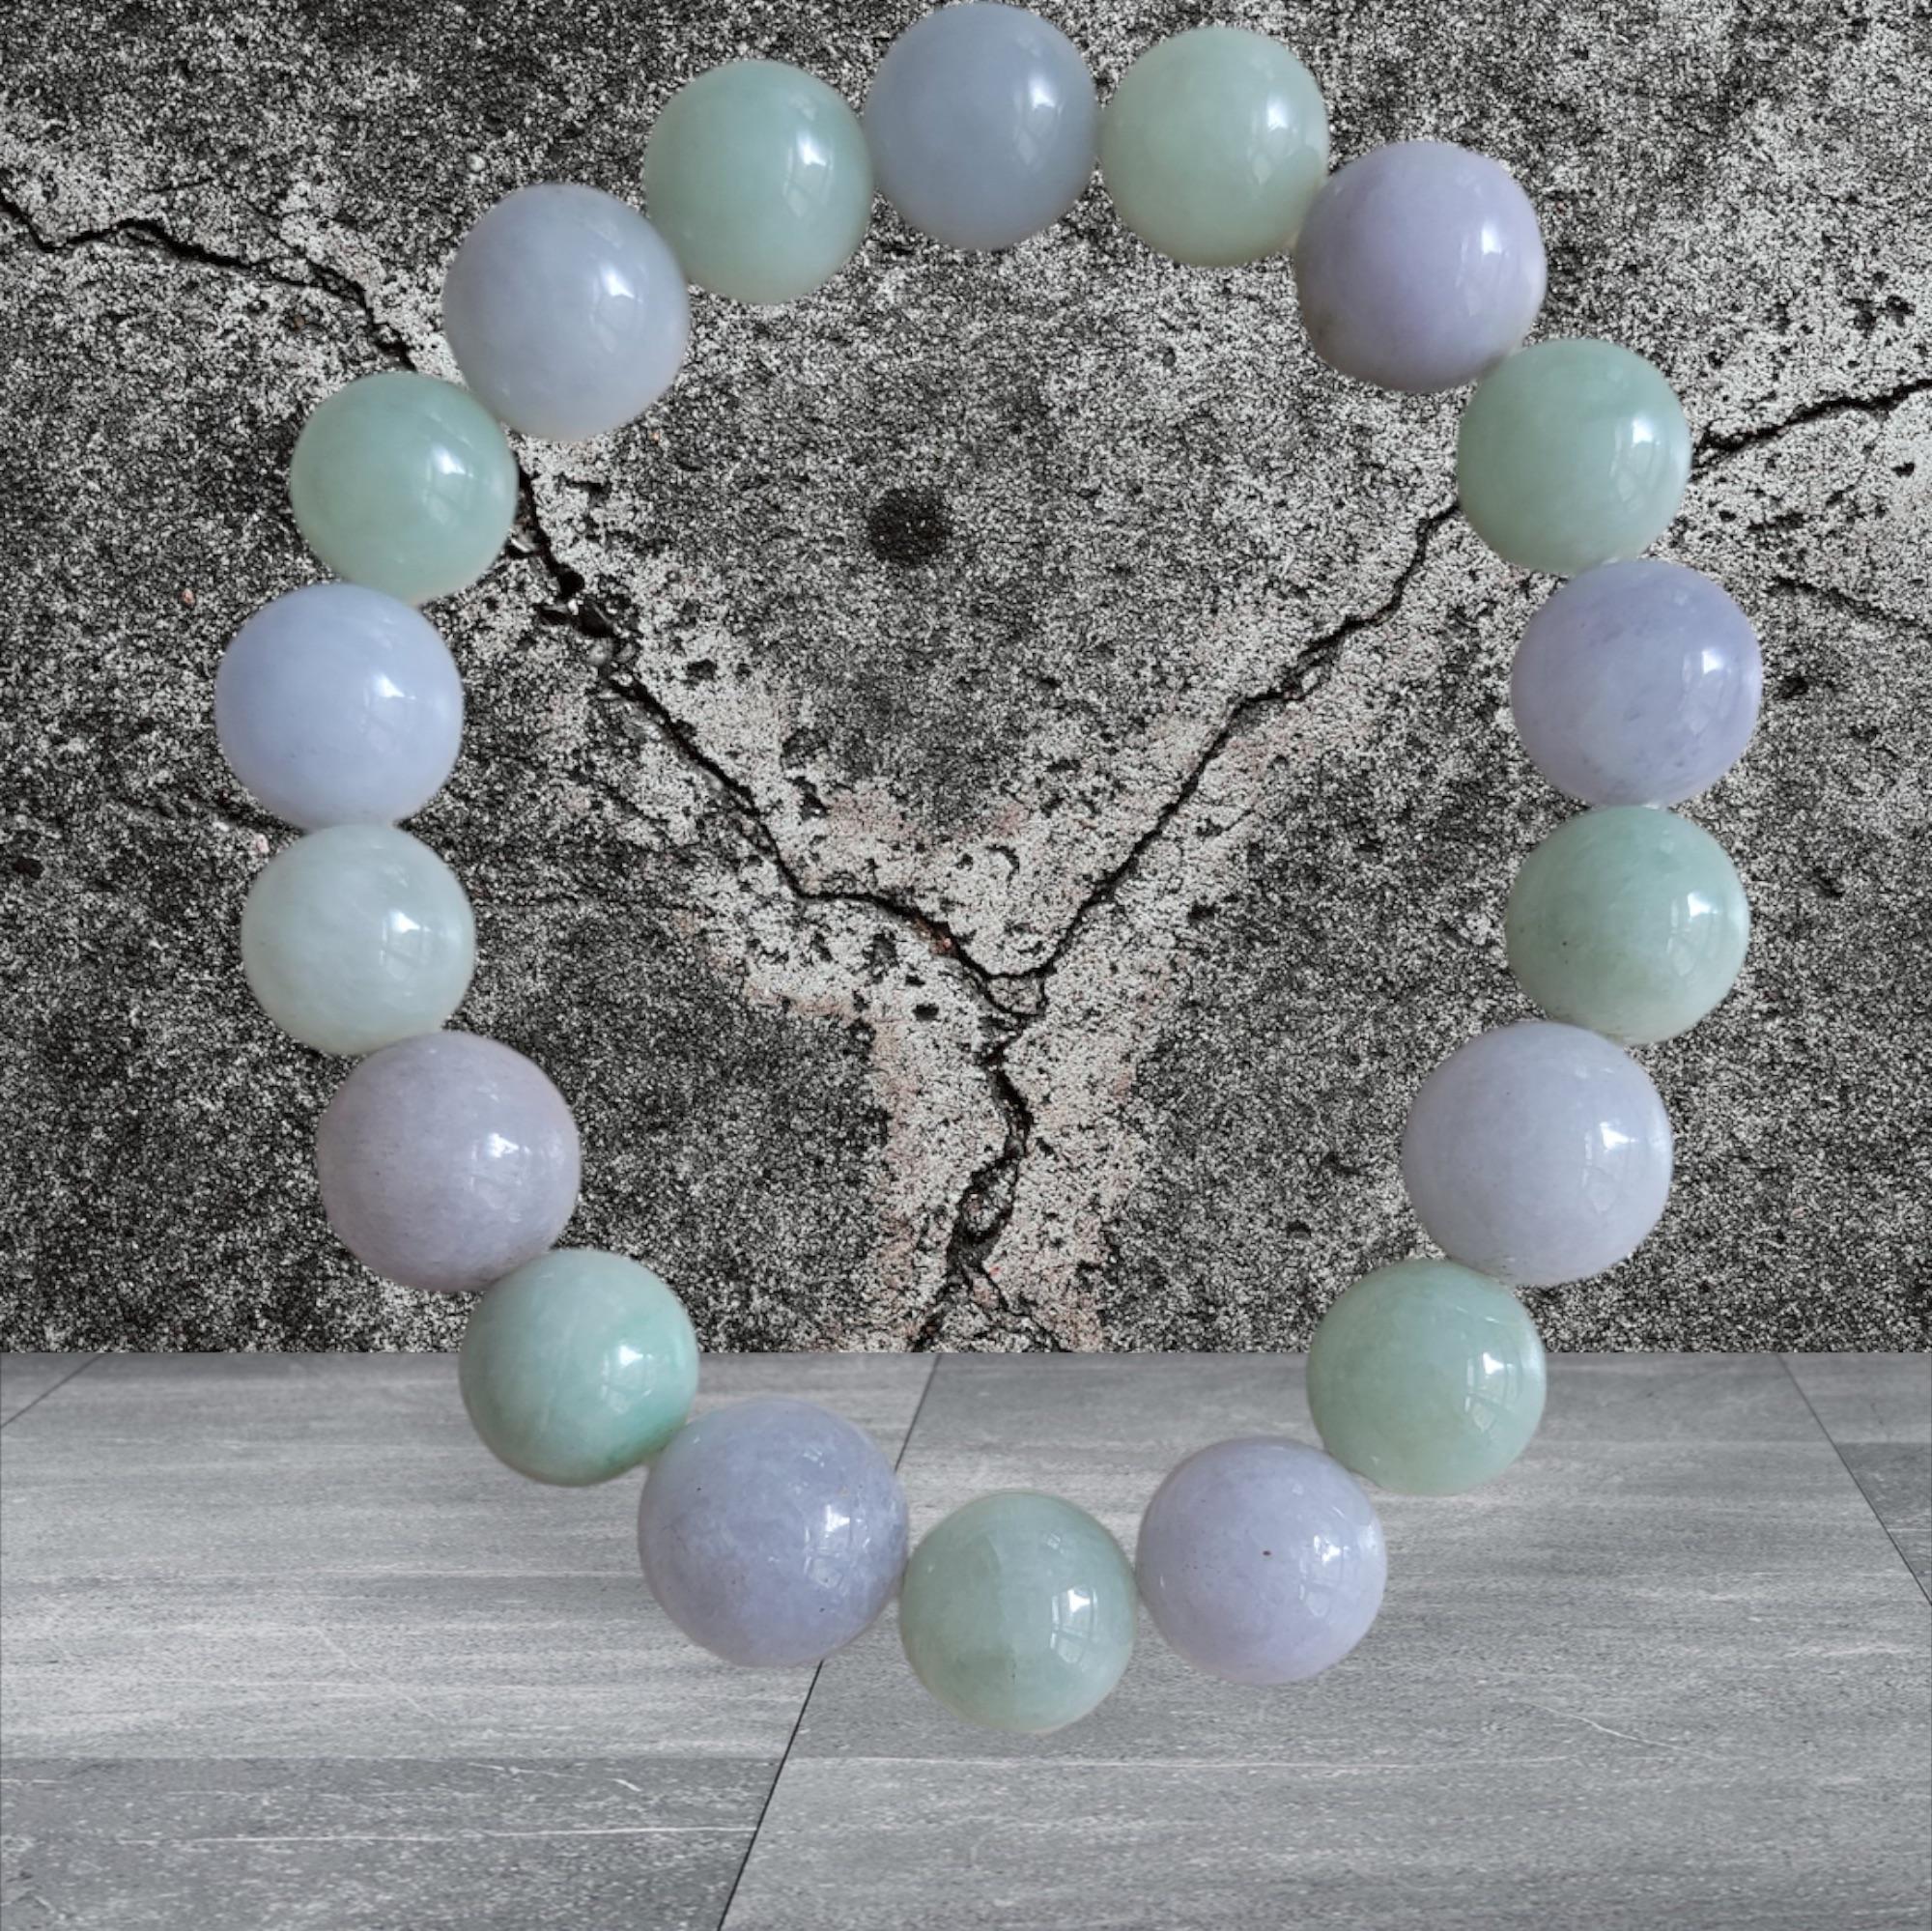 Imperial Green and Purple Lavender Burmese A-Jade Jadeite Beaded Bracelet (10-11mm Each x 18 beads) 07002

10-11mm each, 18 perfectly calibrated Green and Lavender Jadeite Beads. Some of the rarest naturally occurring hues of A-Jadeite, Green and